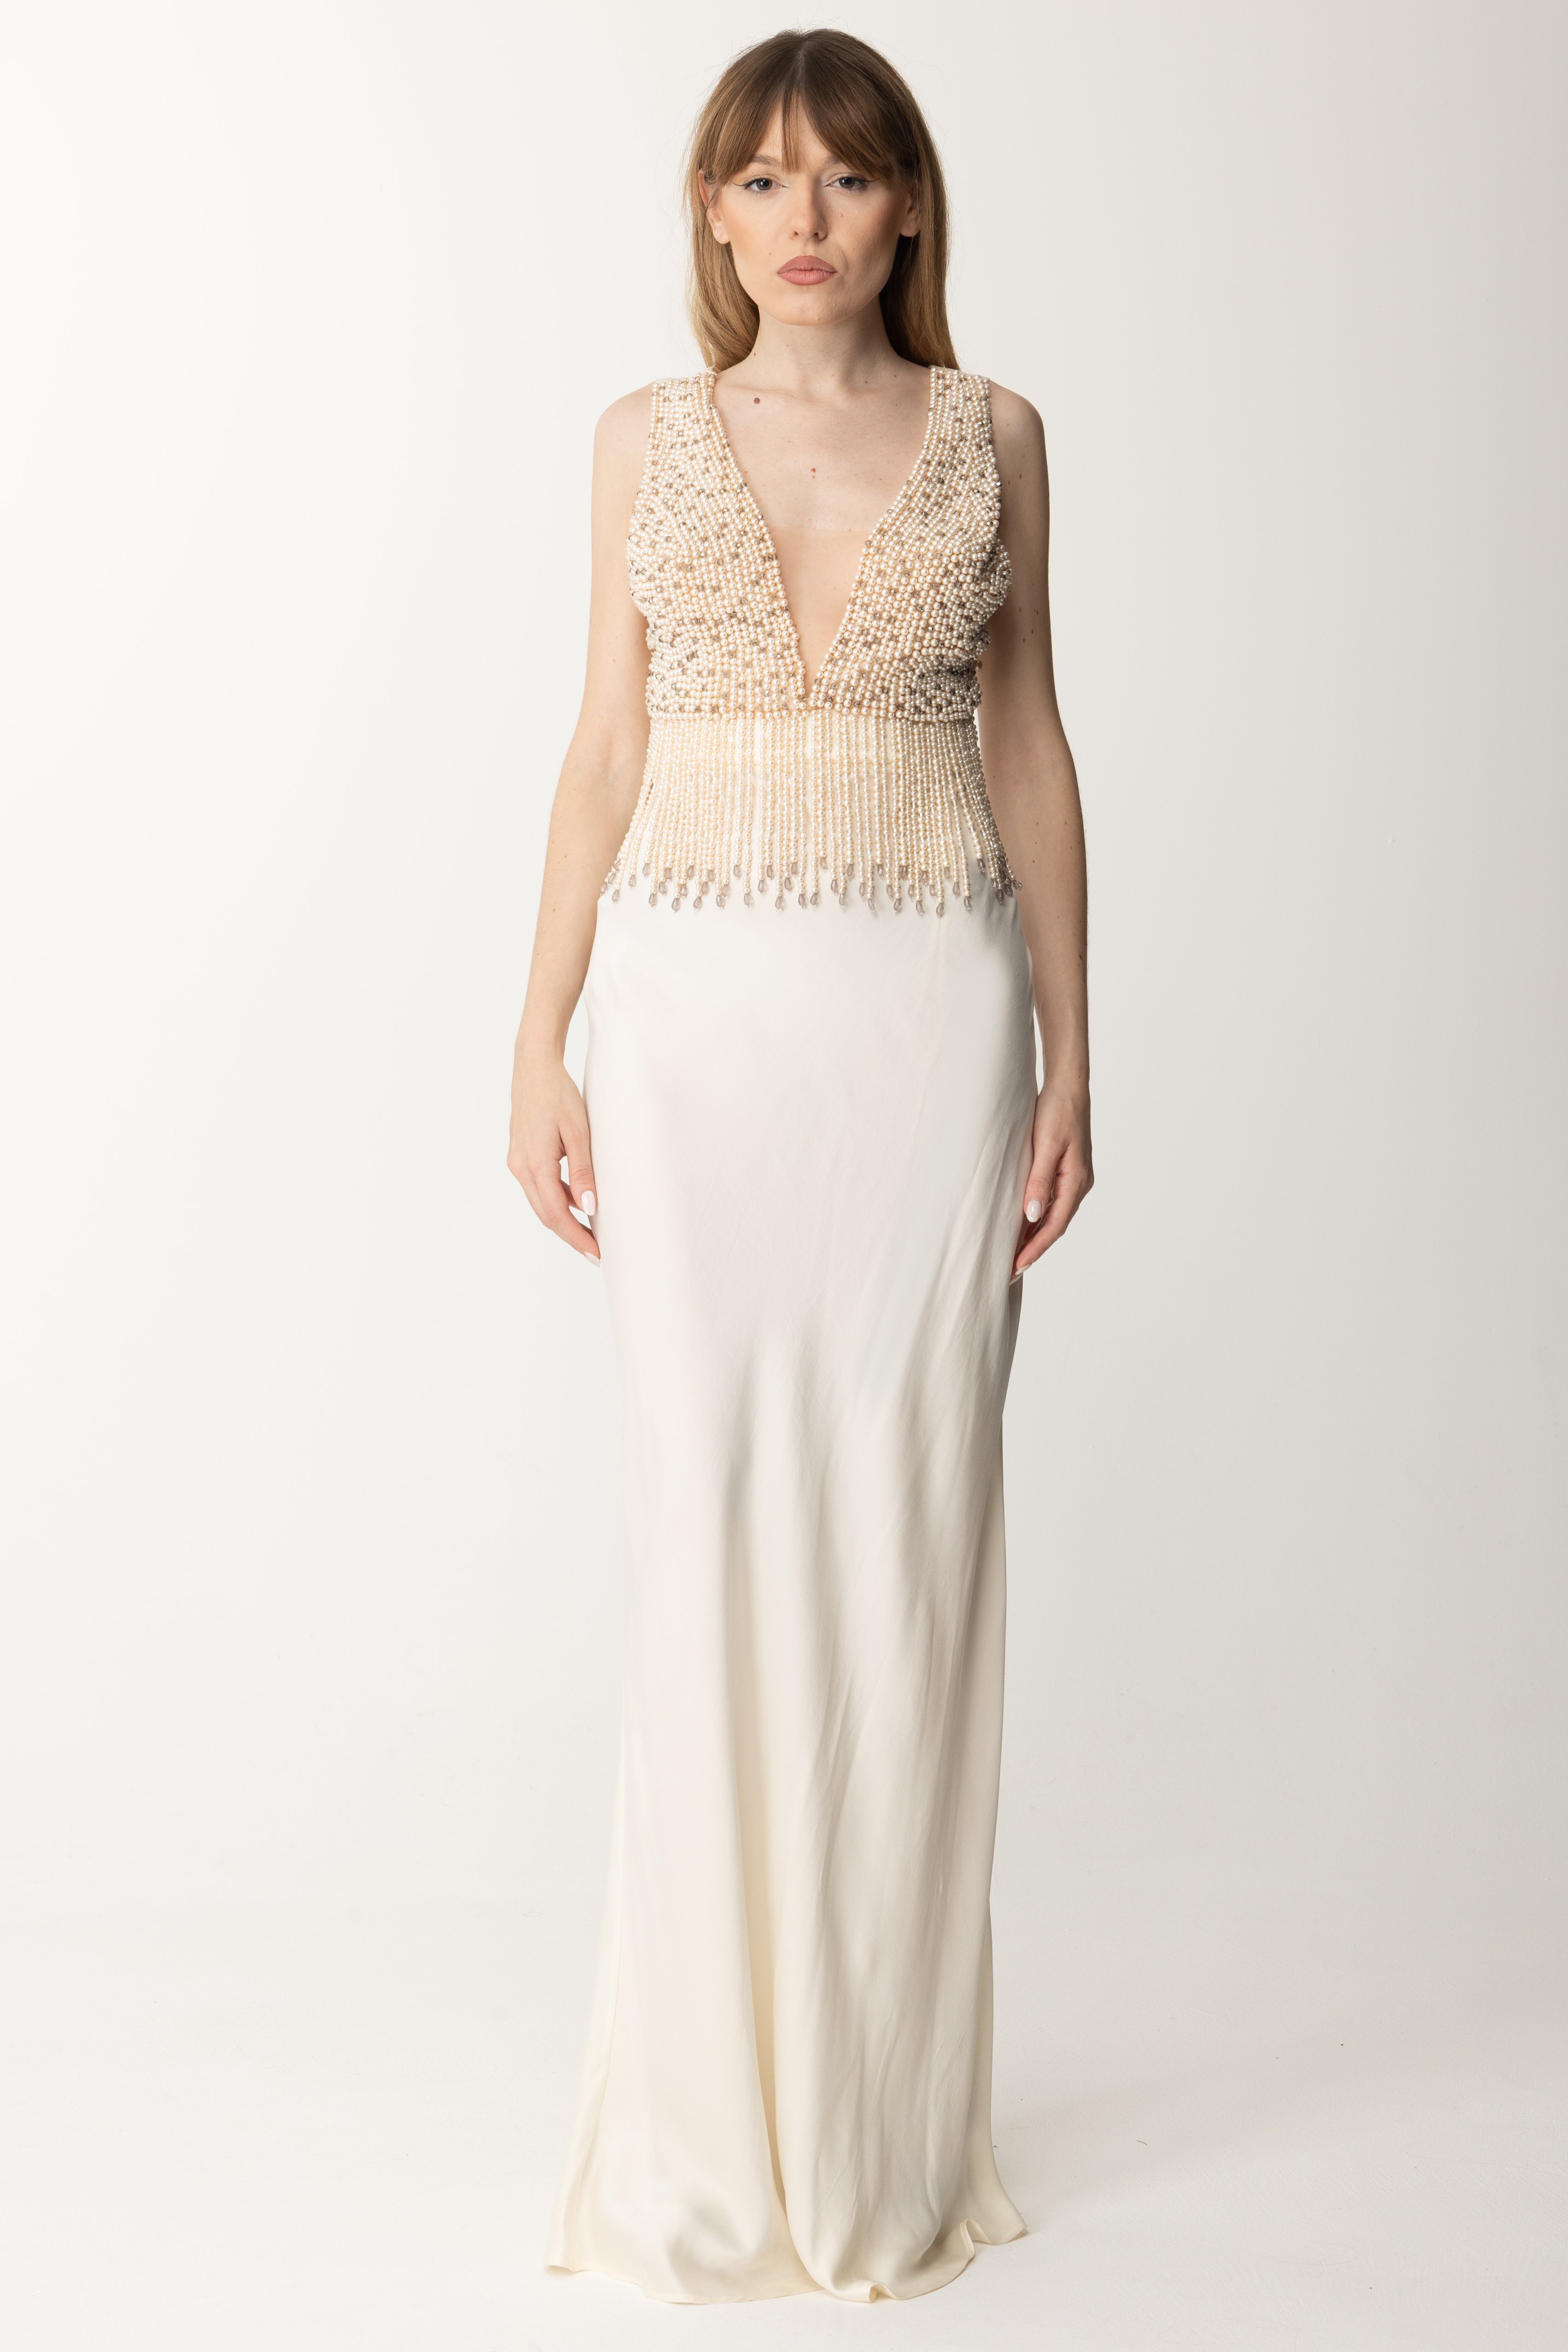 Preview: Elisabetta Franchi Red carpet silk dress with embroidered bodice Burro